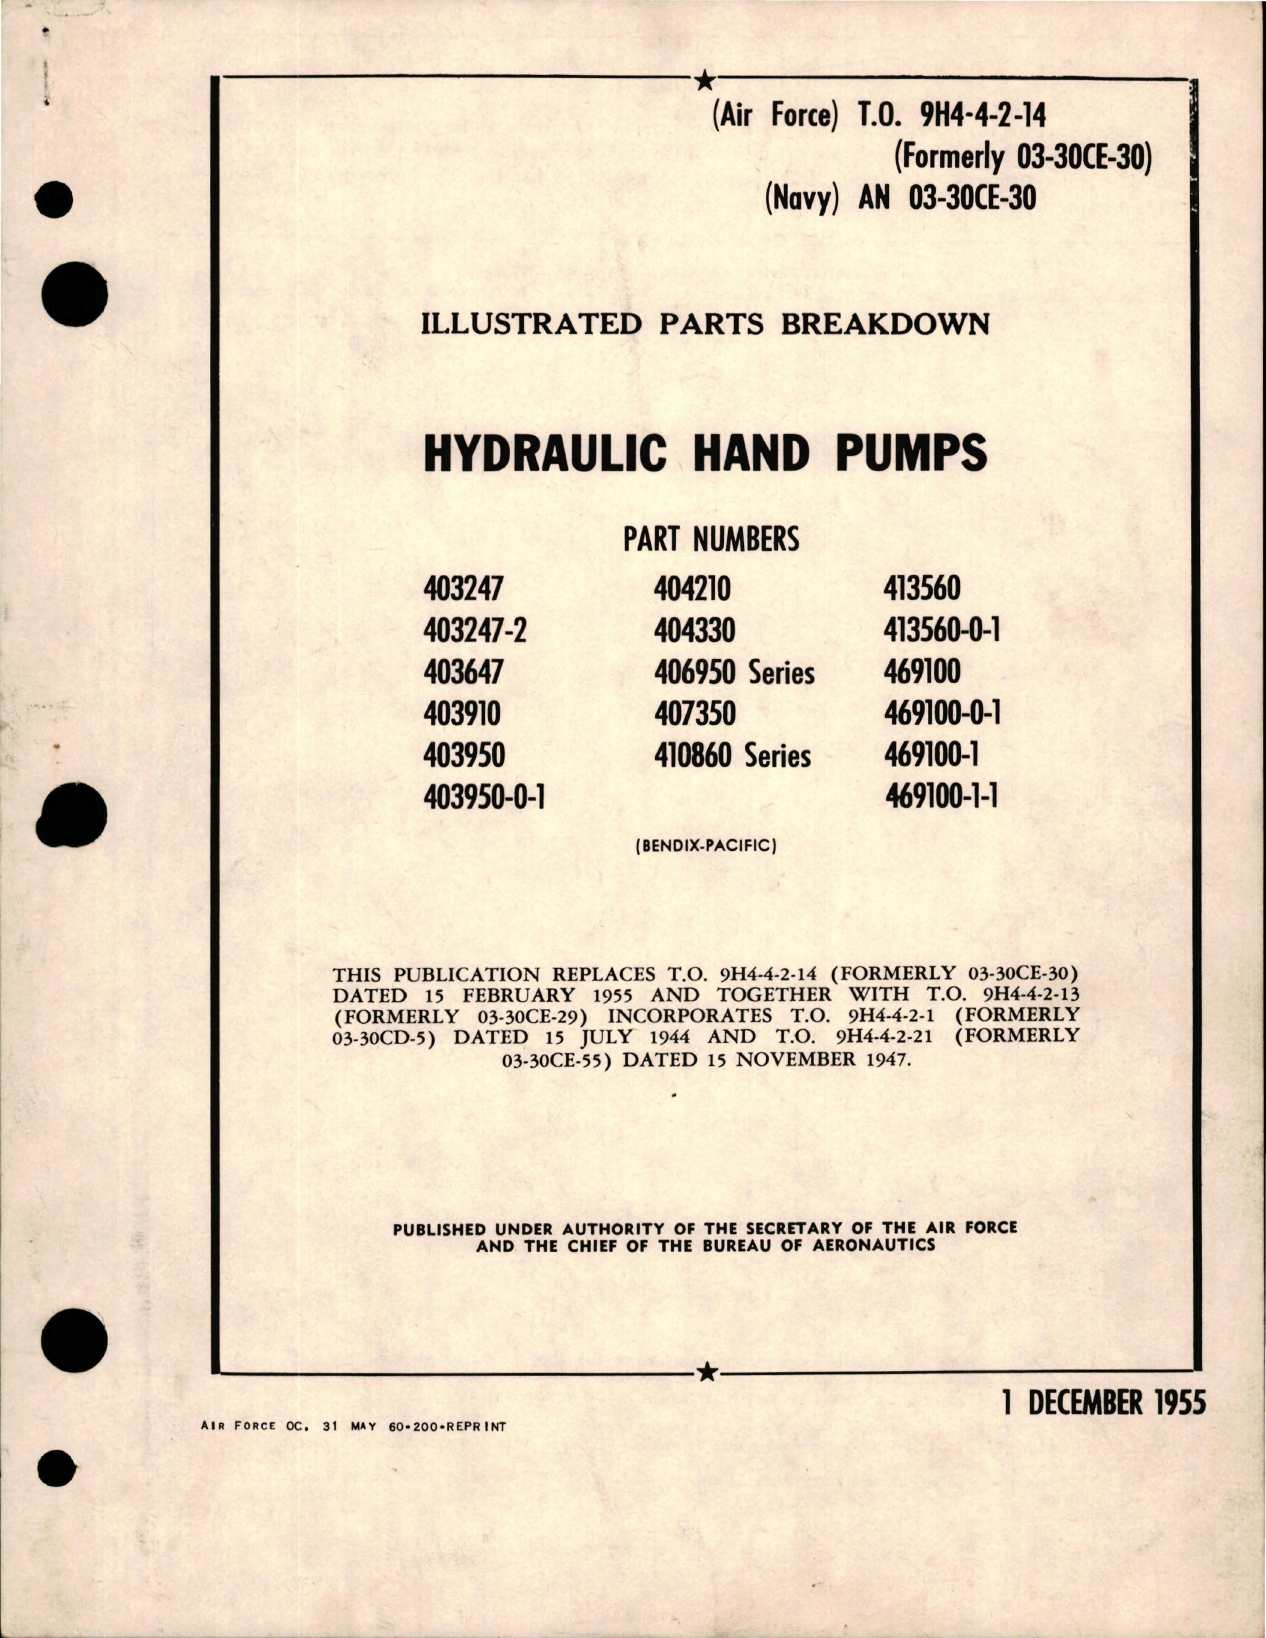 Sample page 1 from AirCorps Library document: Illustrated Parts Breakdown for Hydraulic Hand Pumps